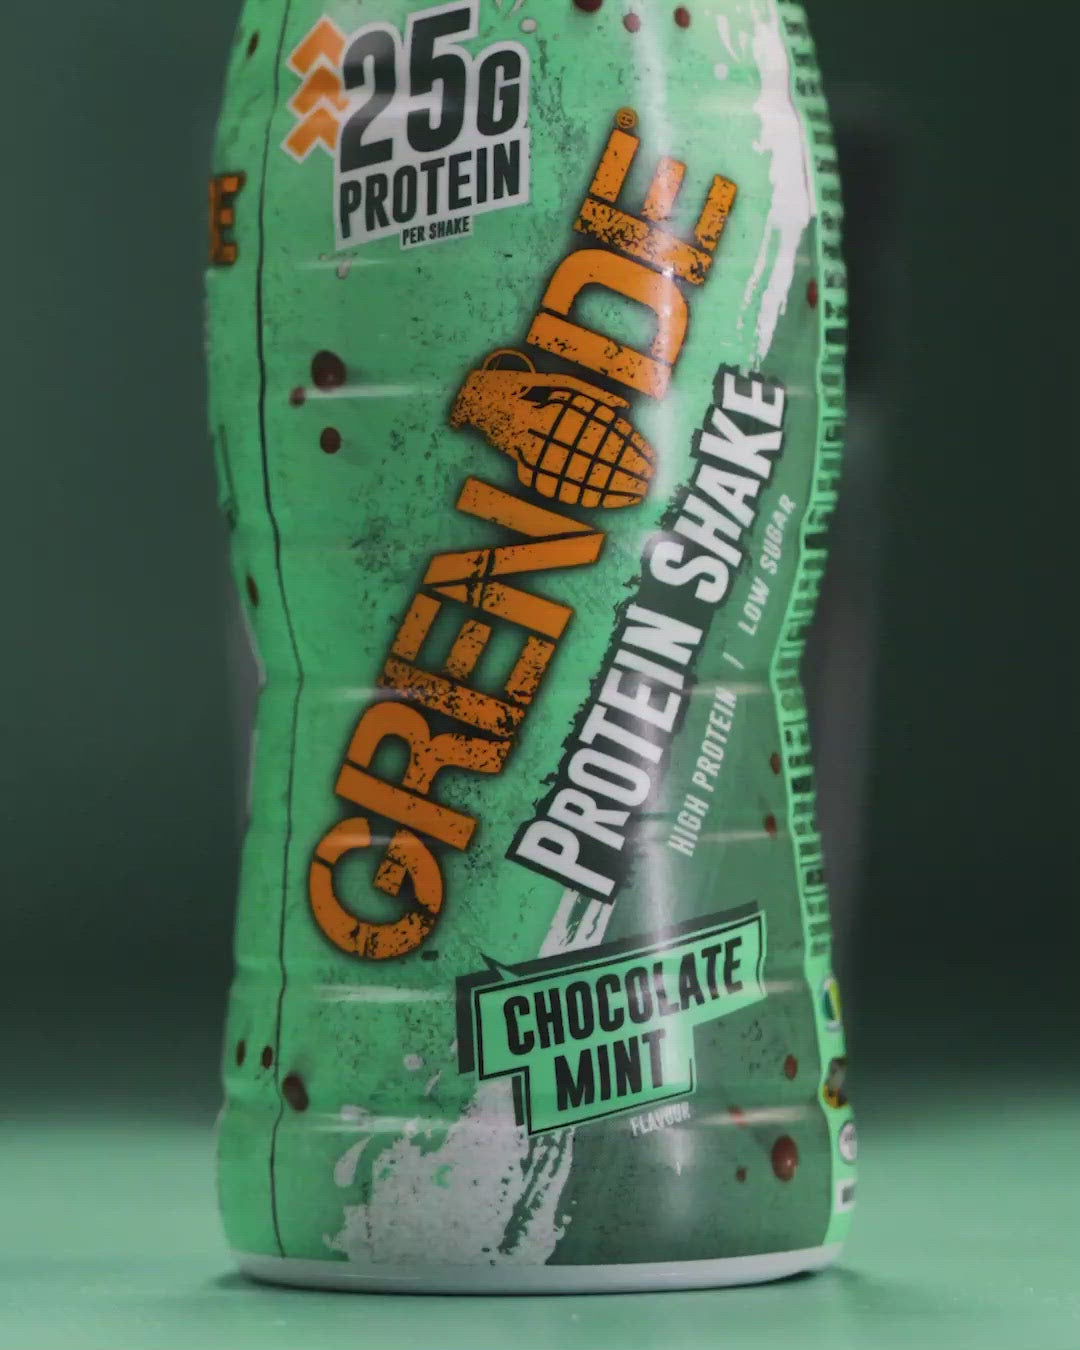 Video of Grenade Mint Protein Shake being poured